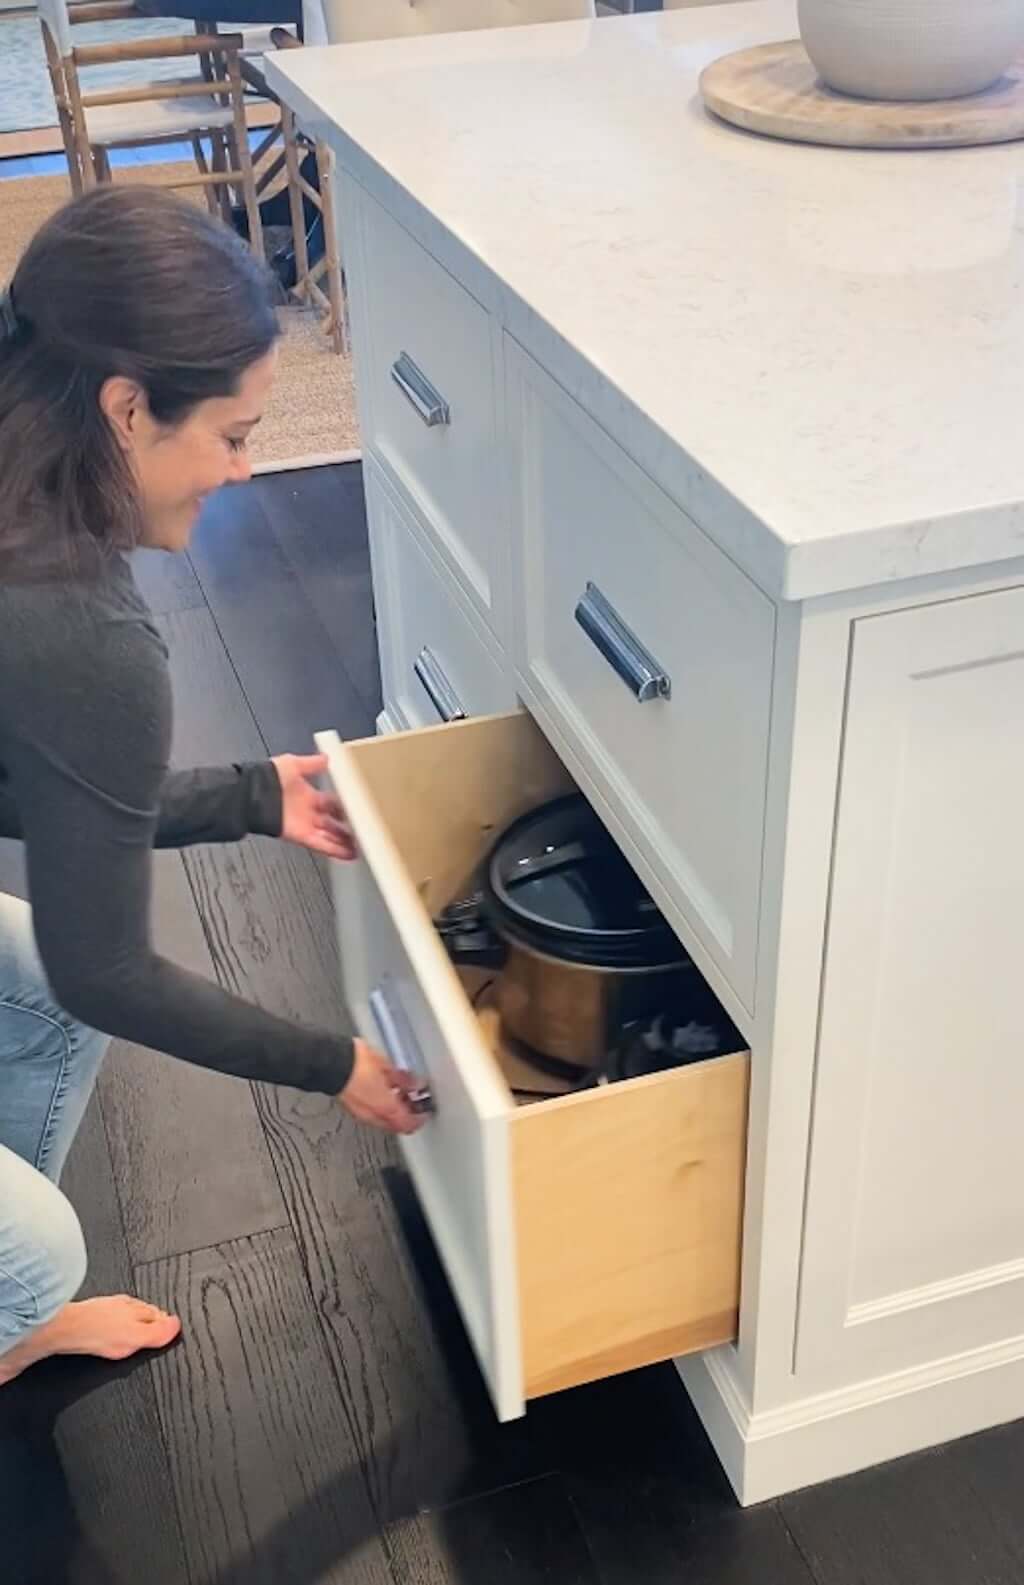 https://thebrainandthebrawn.com/wp-content/uploads/2023/02/Appliance-Drawers-Instead-of-Cabinets.jpg